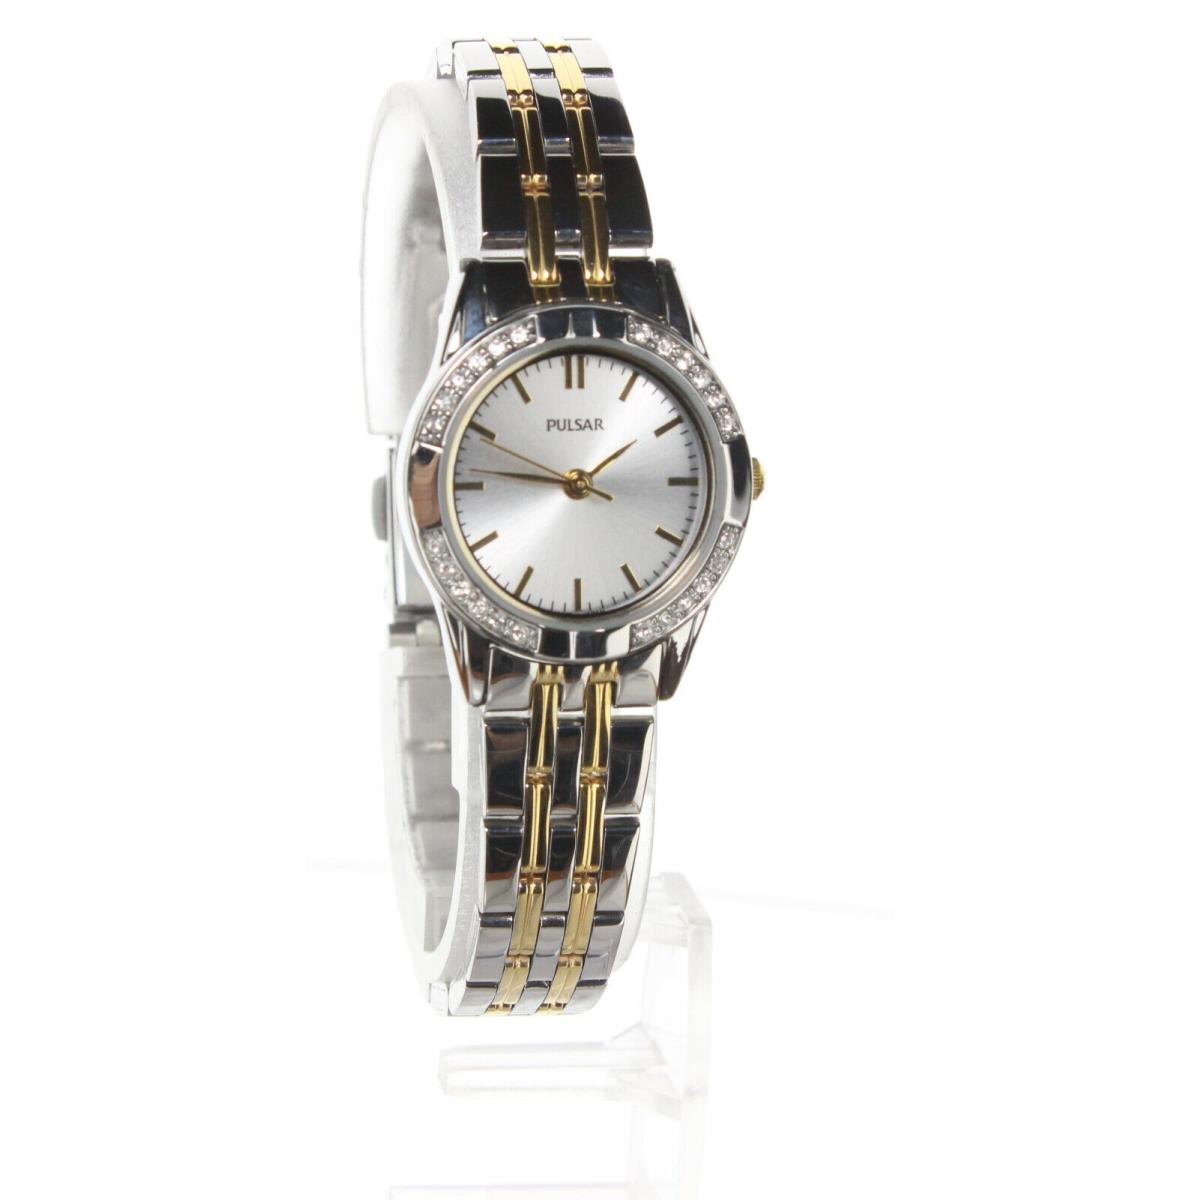 Pulsar Ladies Classic Two Tone Stainless Steel Swarovski Crystal Watch - Dial: Silver, Band: Gold